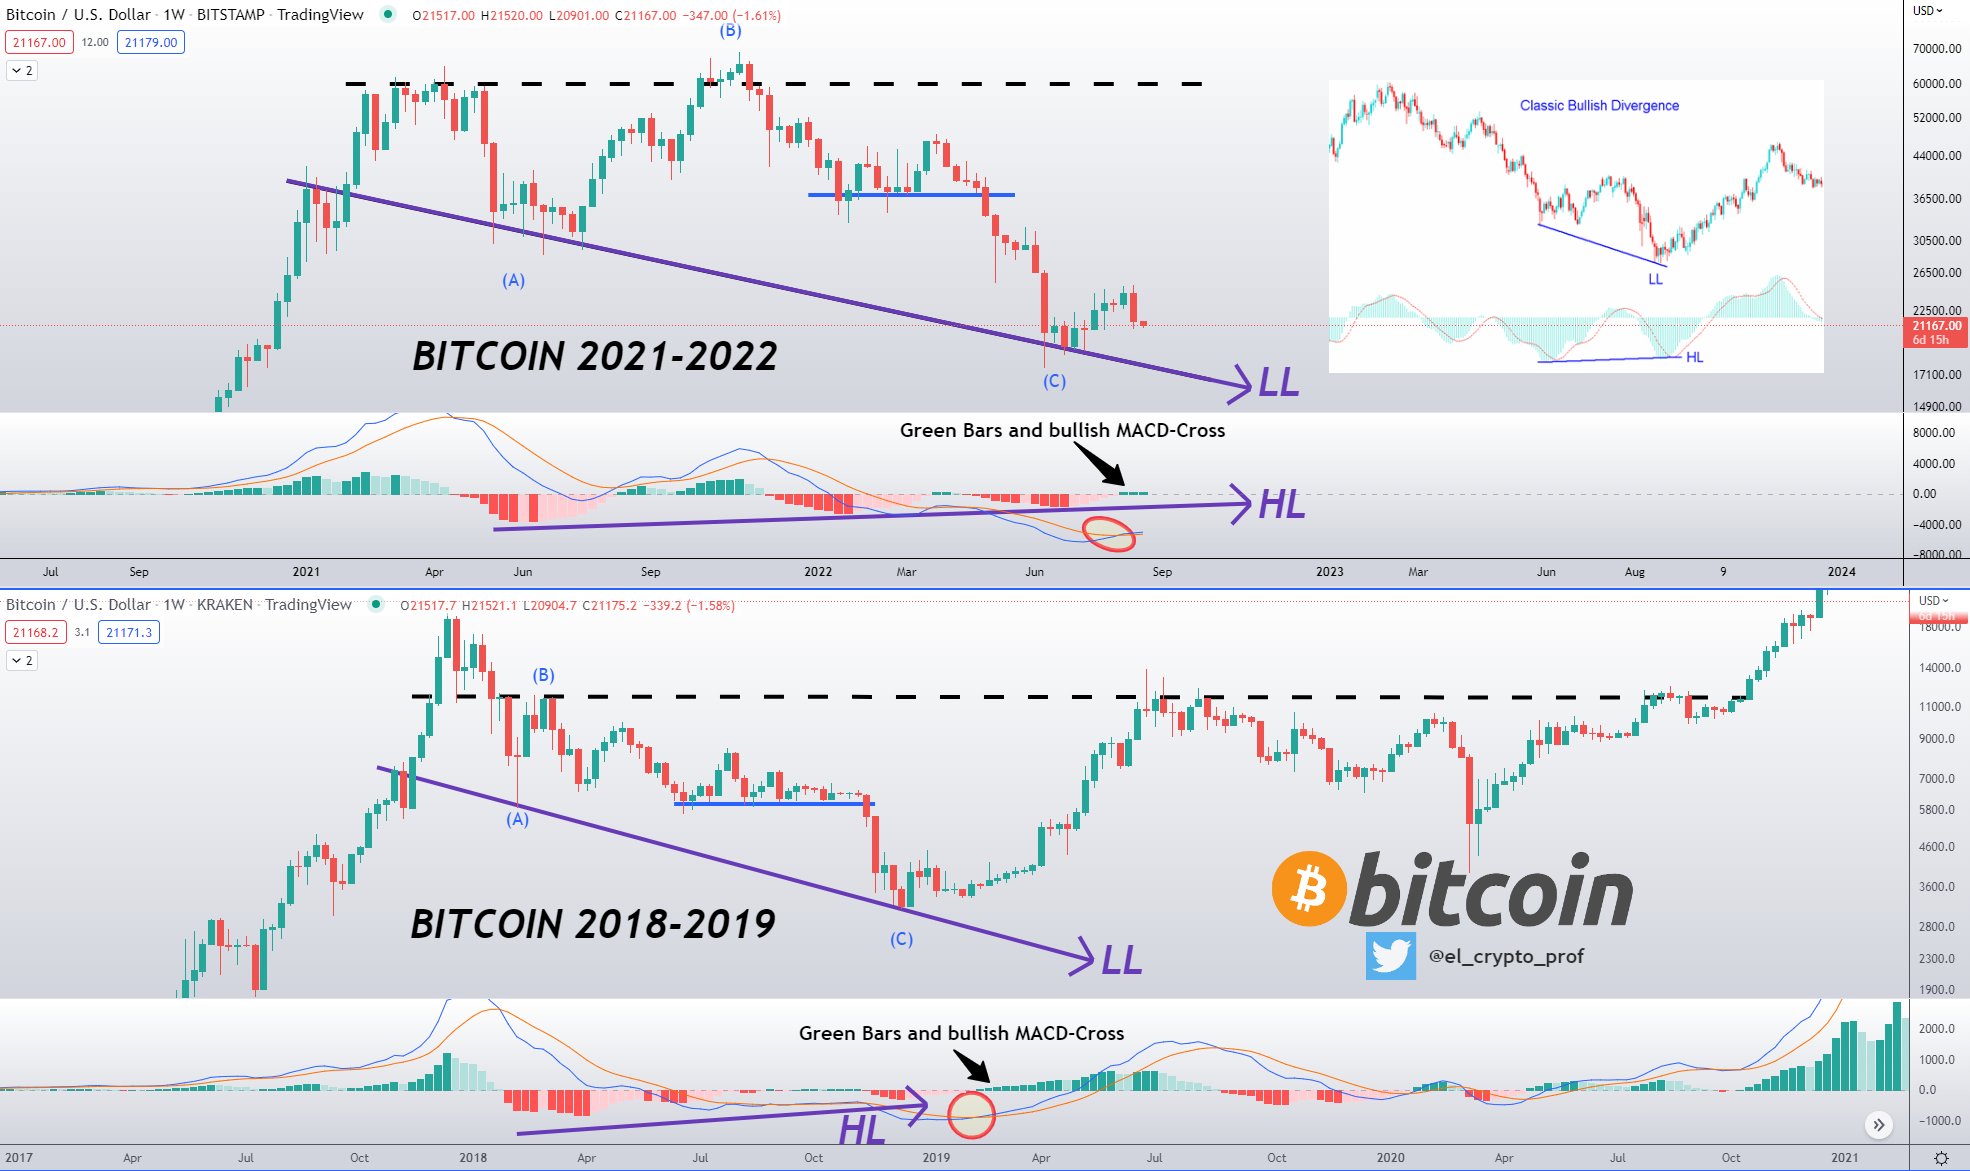 Comparing Bitcoin price chart to 2018-19